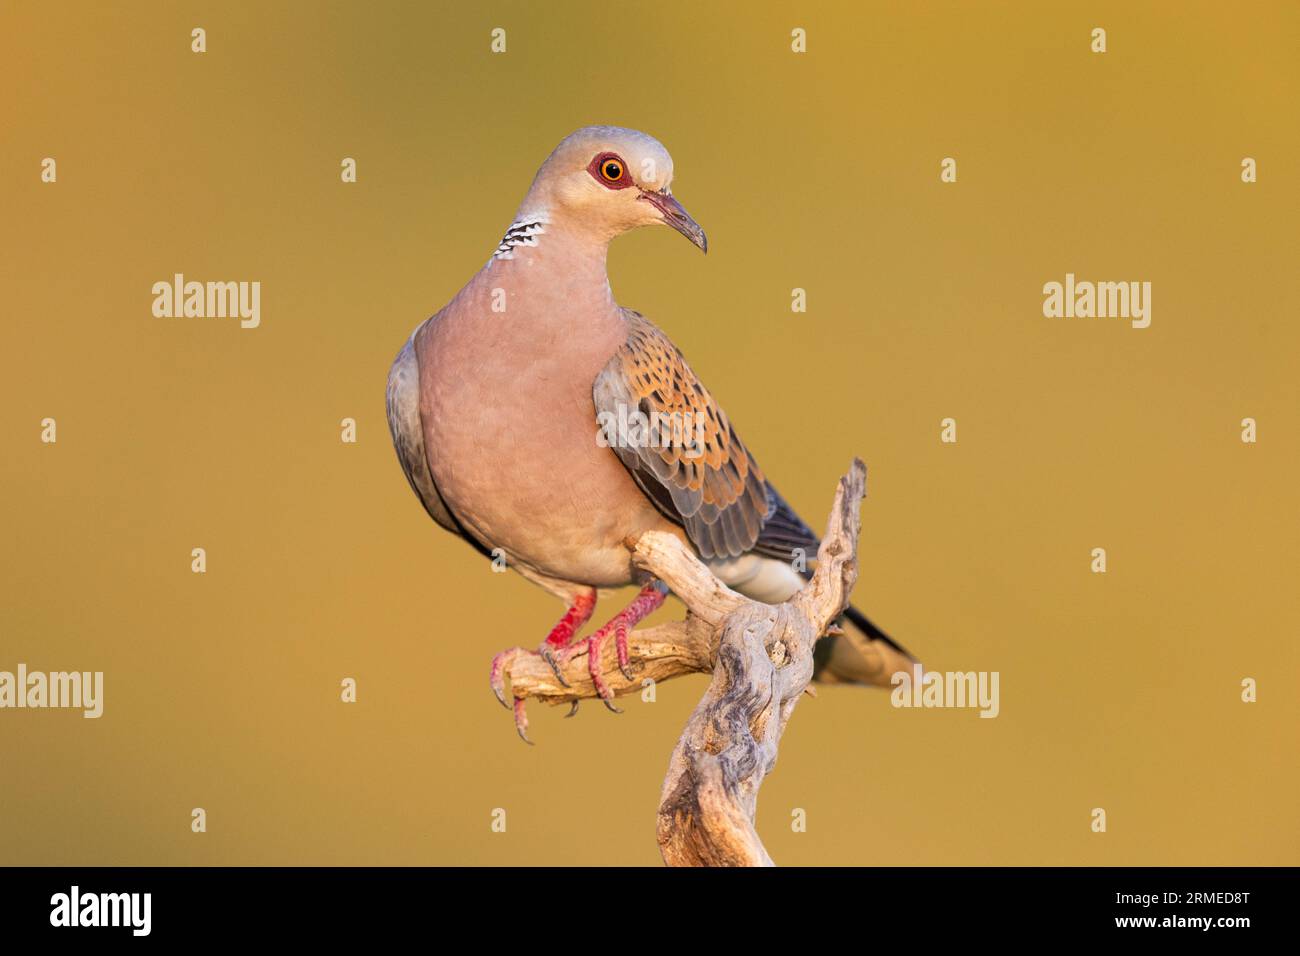 European Turtle Dove (Streptopelia turtur), front view of an adult male perched on a branch, Campania, Italy Stock Photo